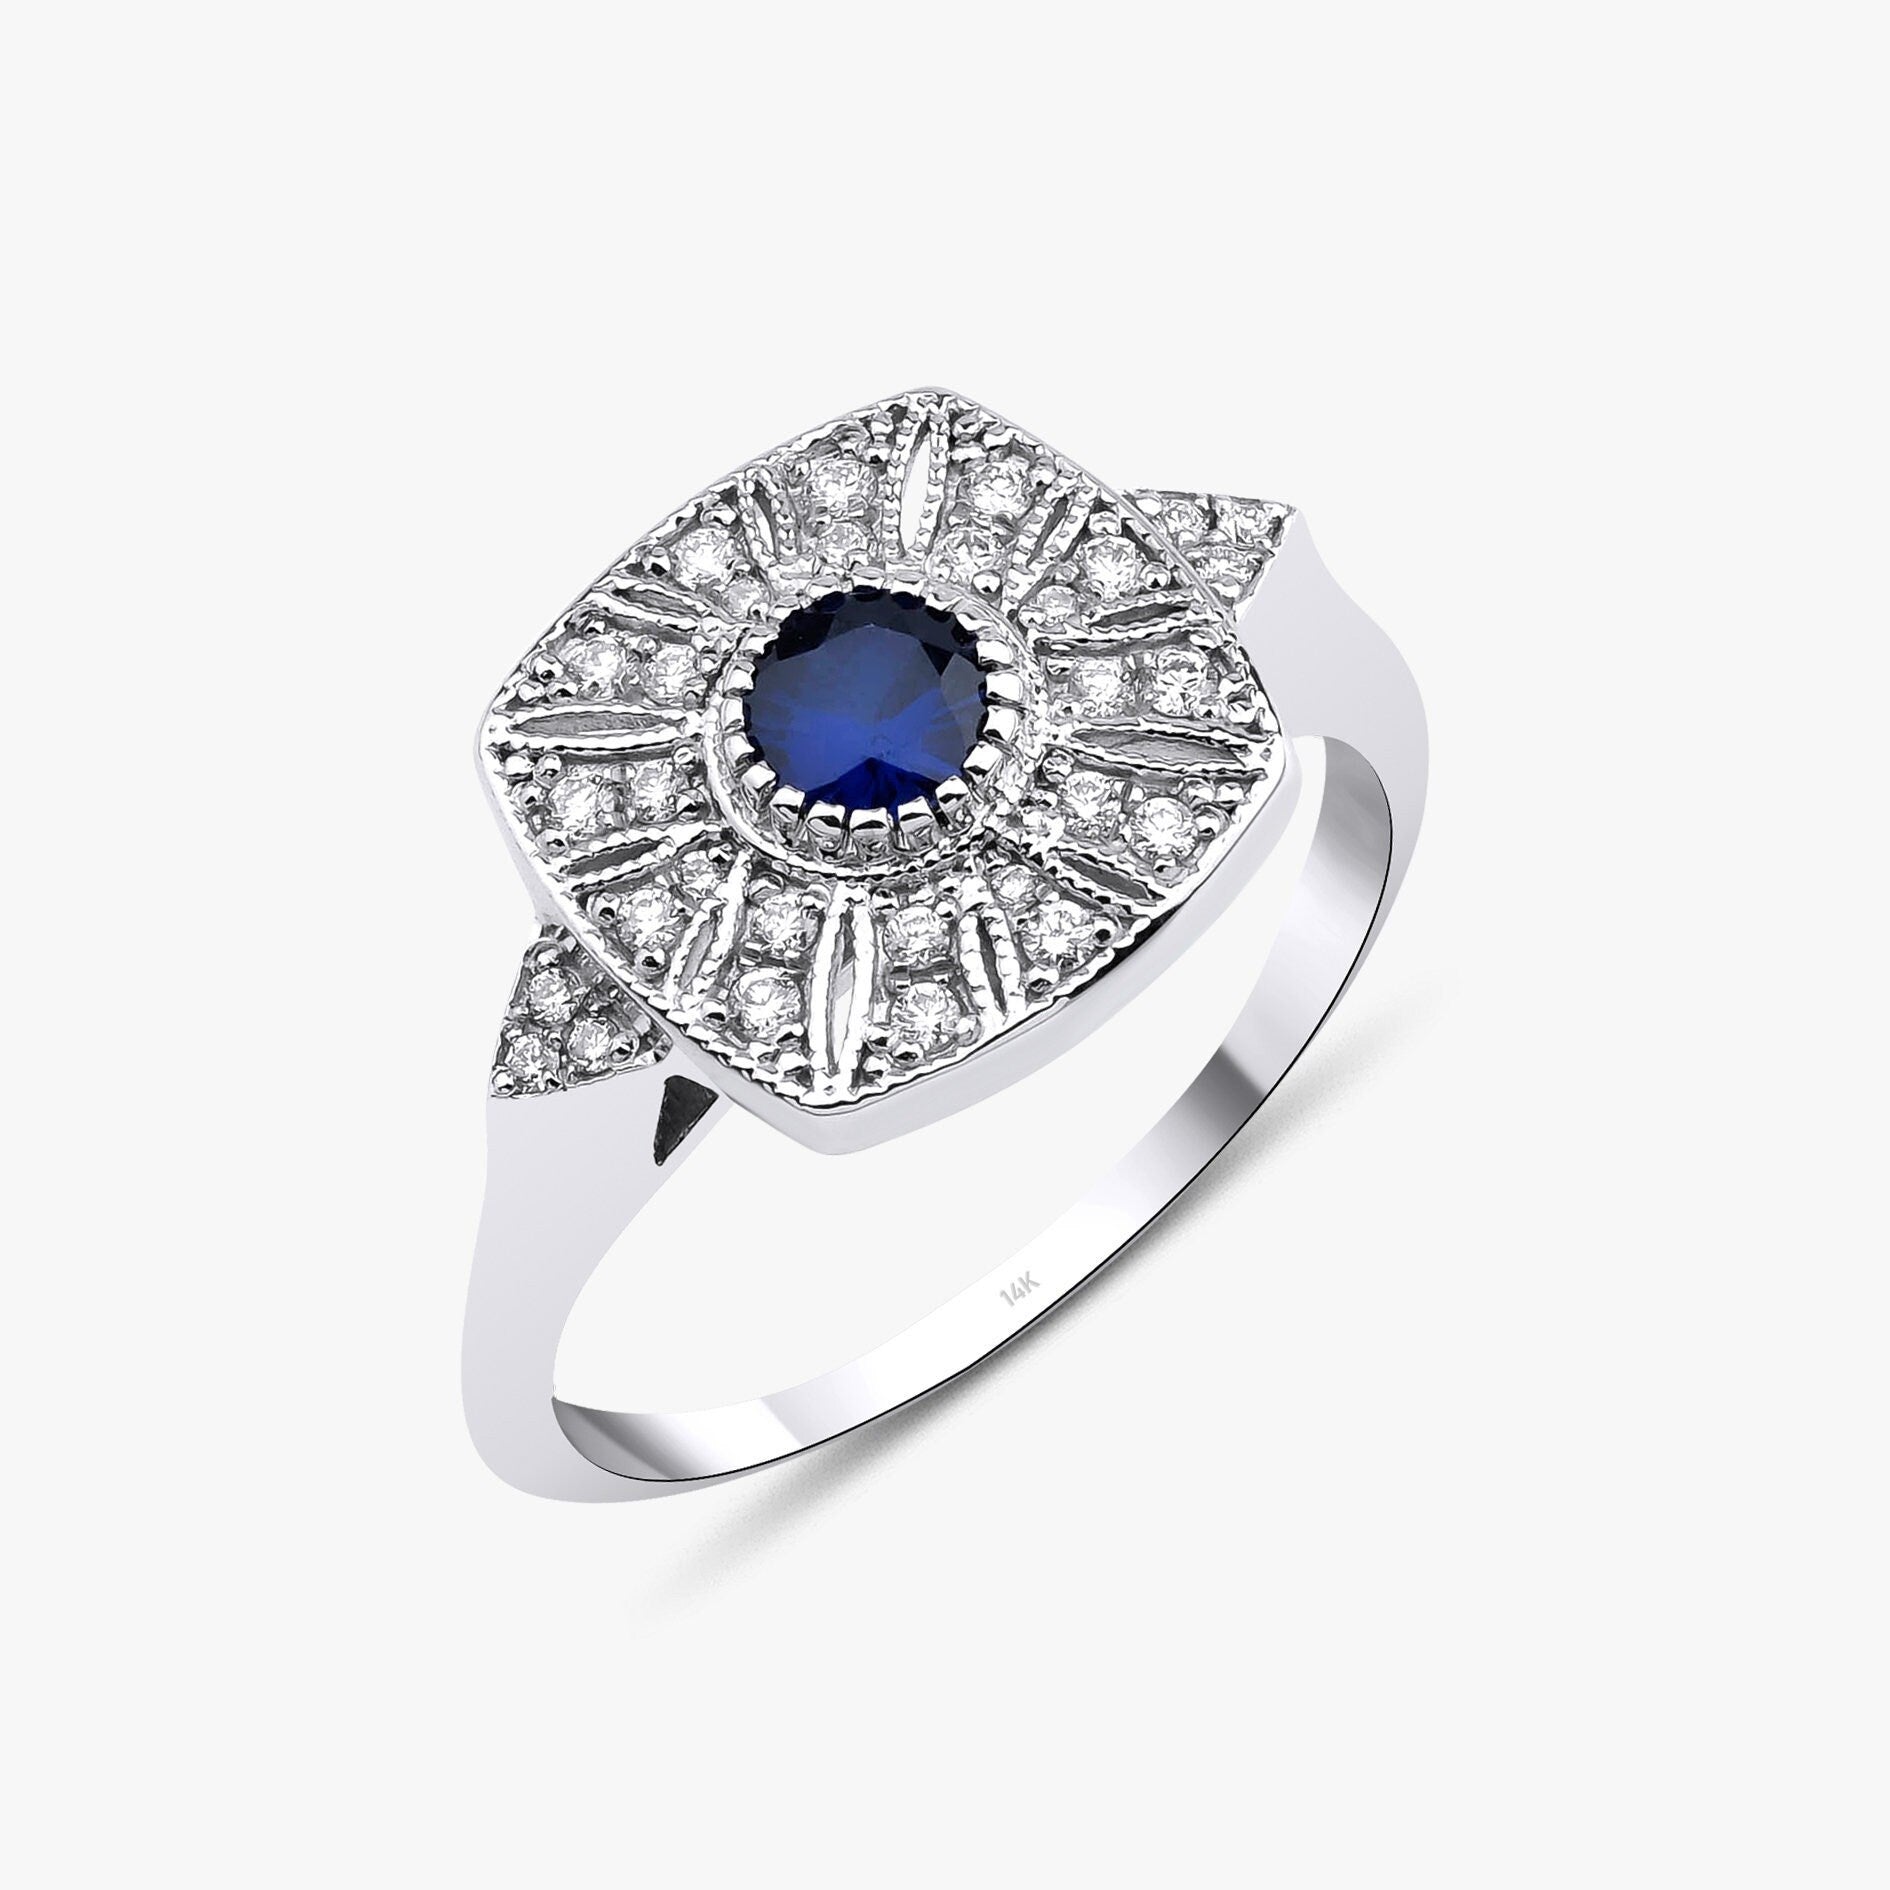 Round Cut Sapphire and Diamond Ring in 14K Gold